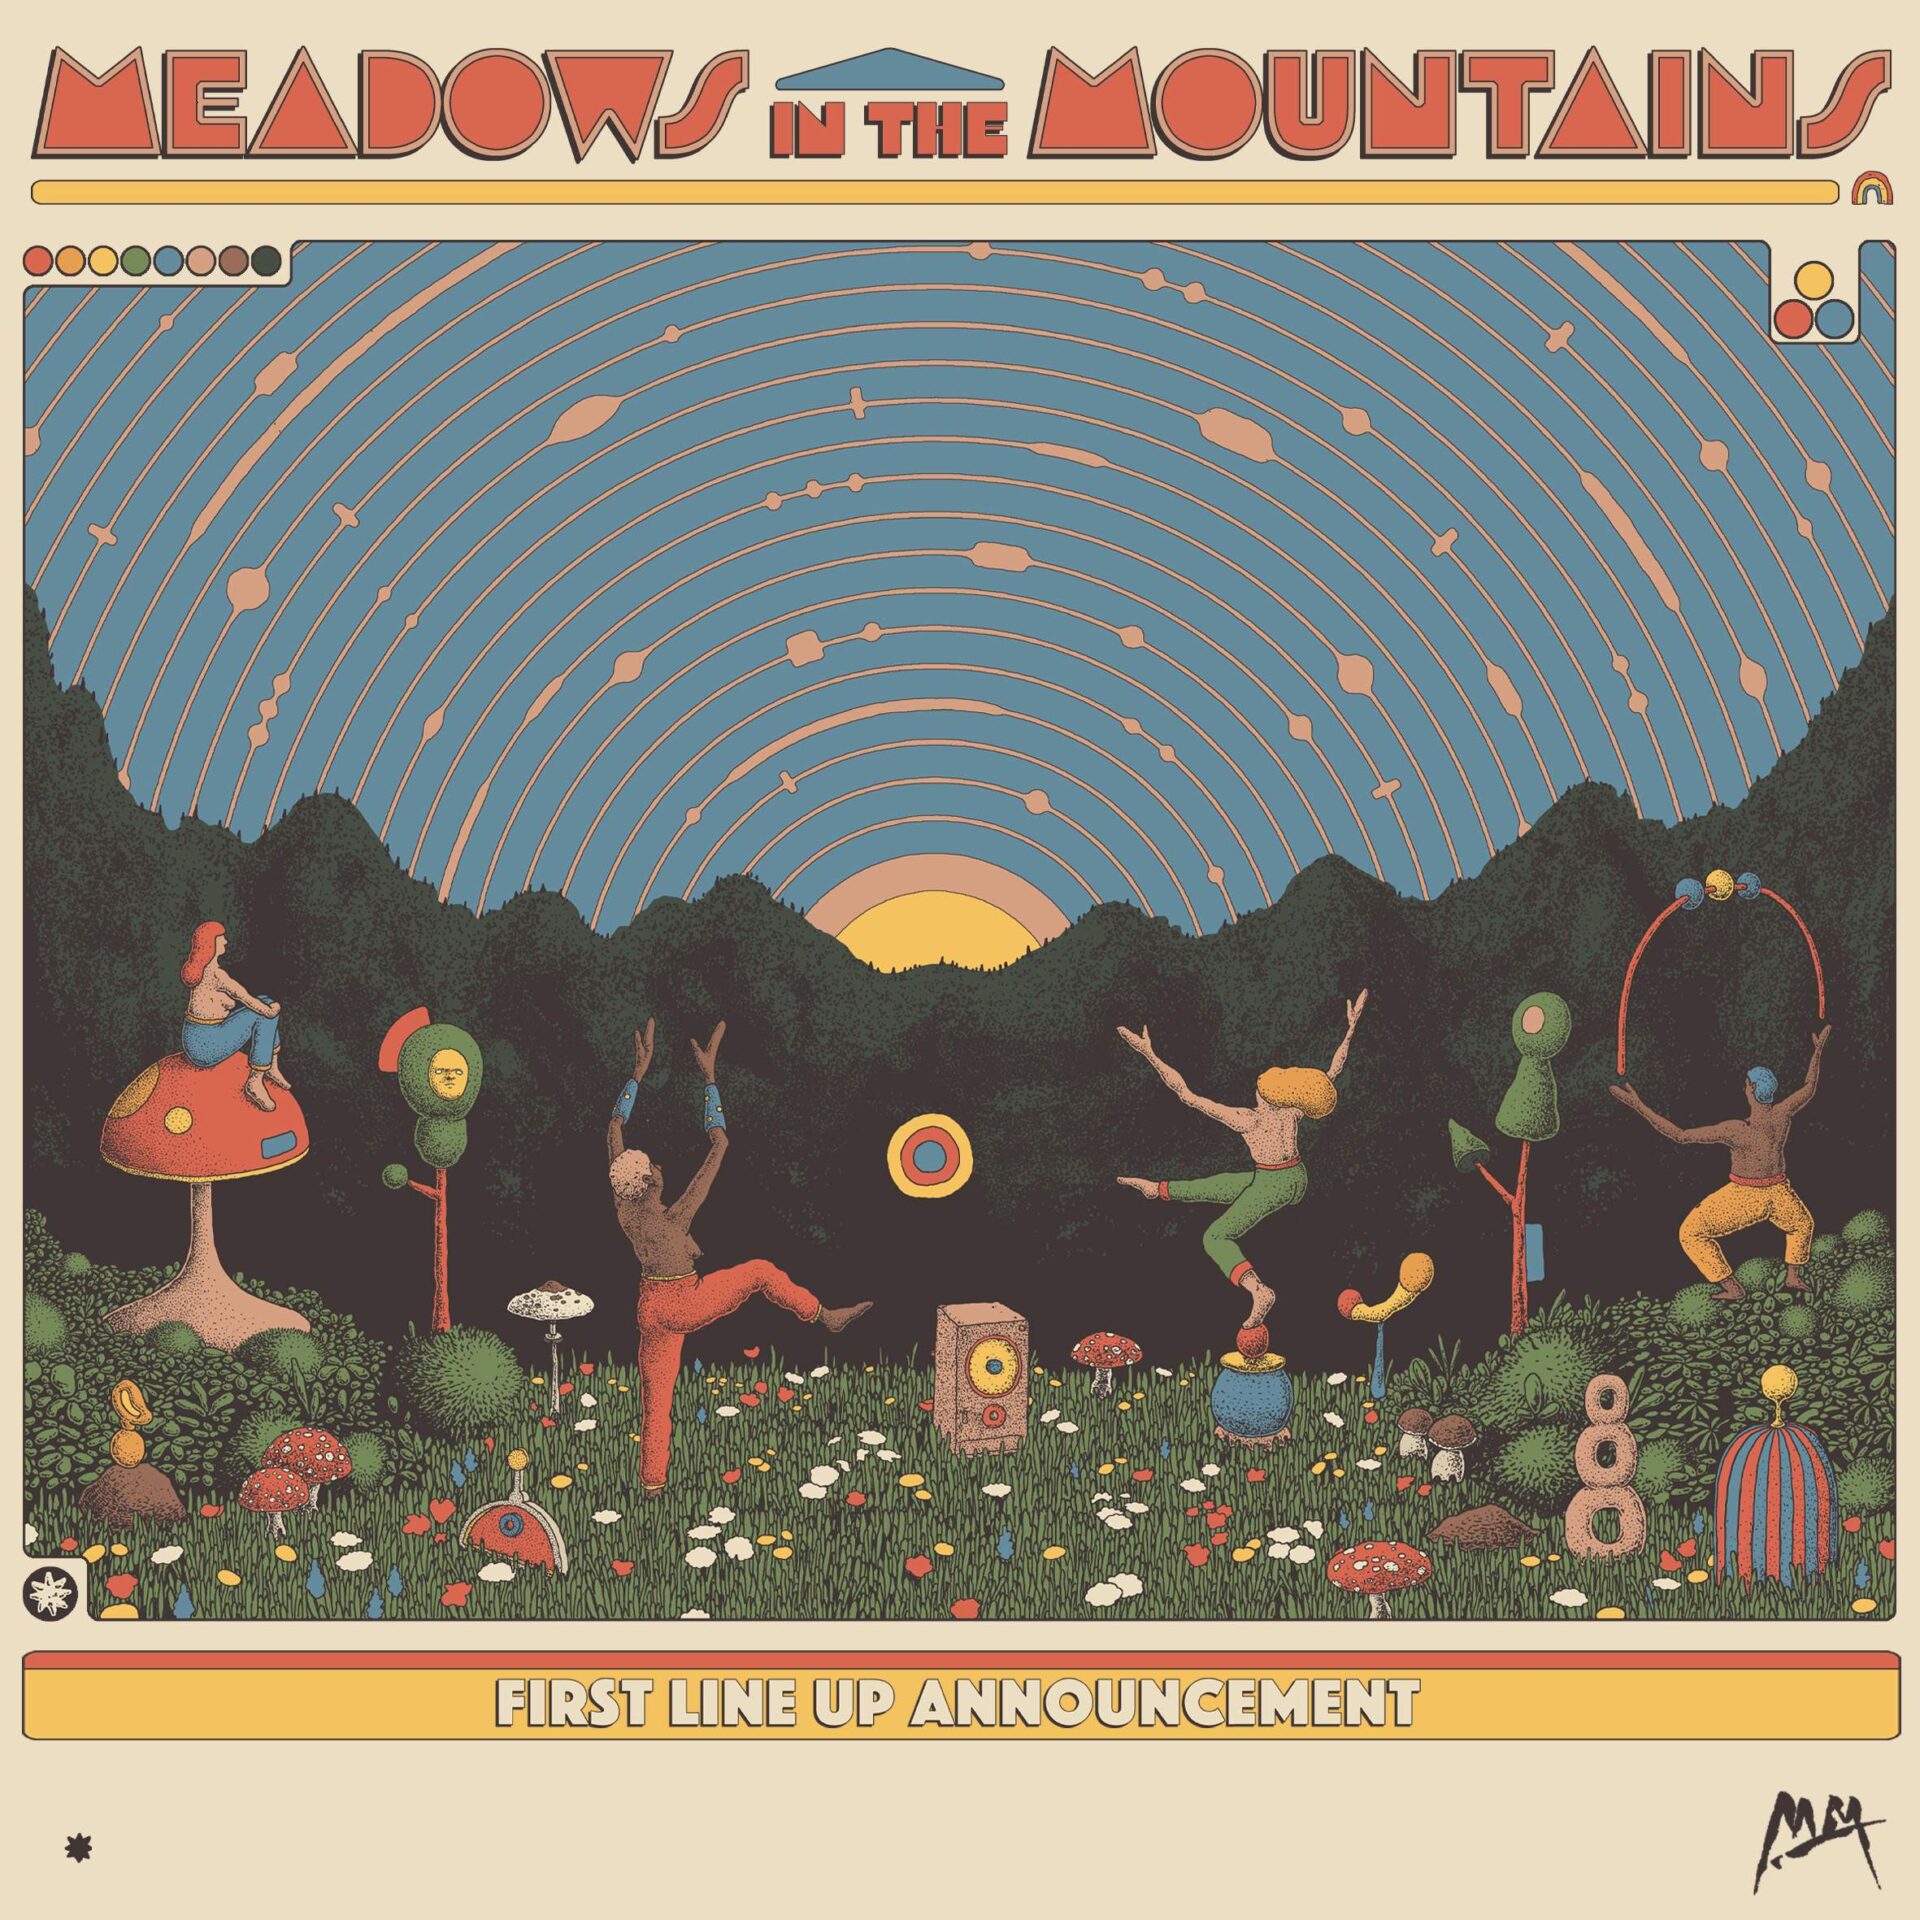 Meadows in the Mountains